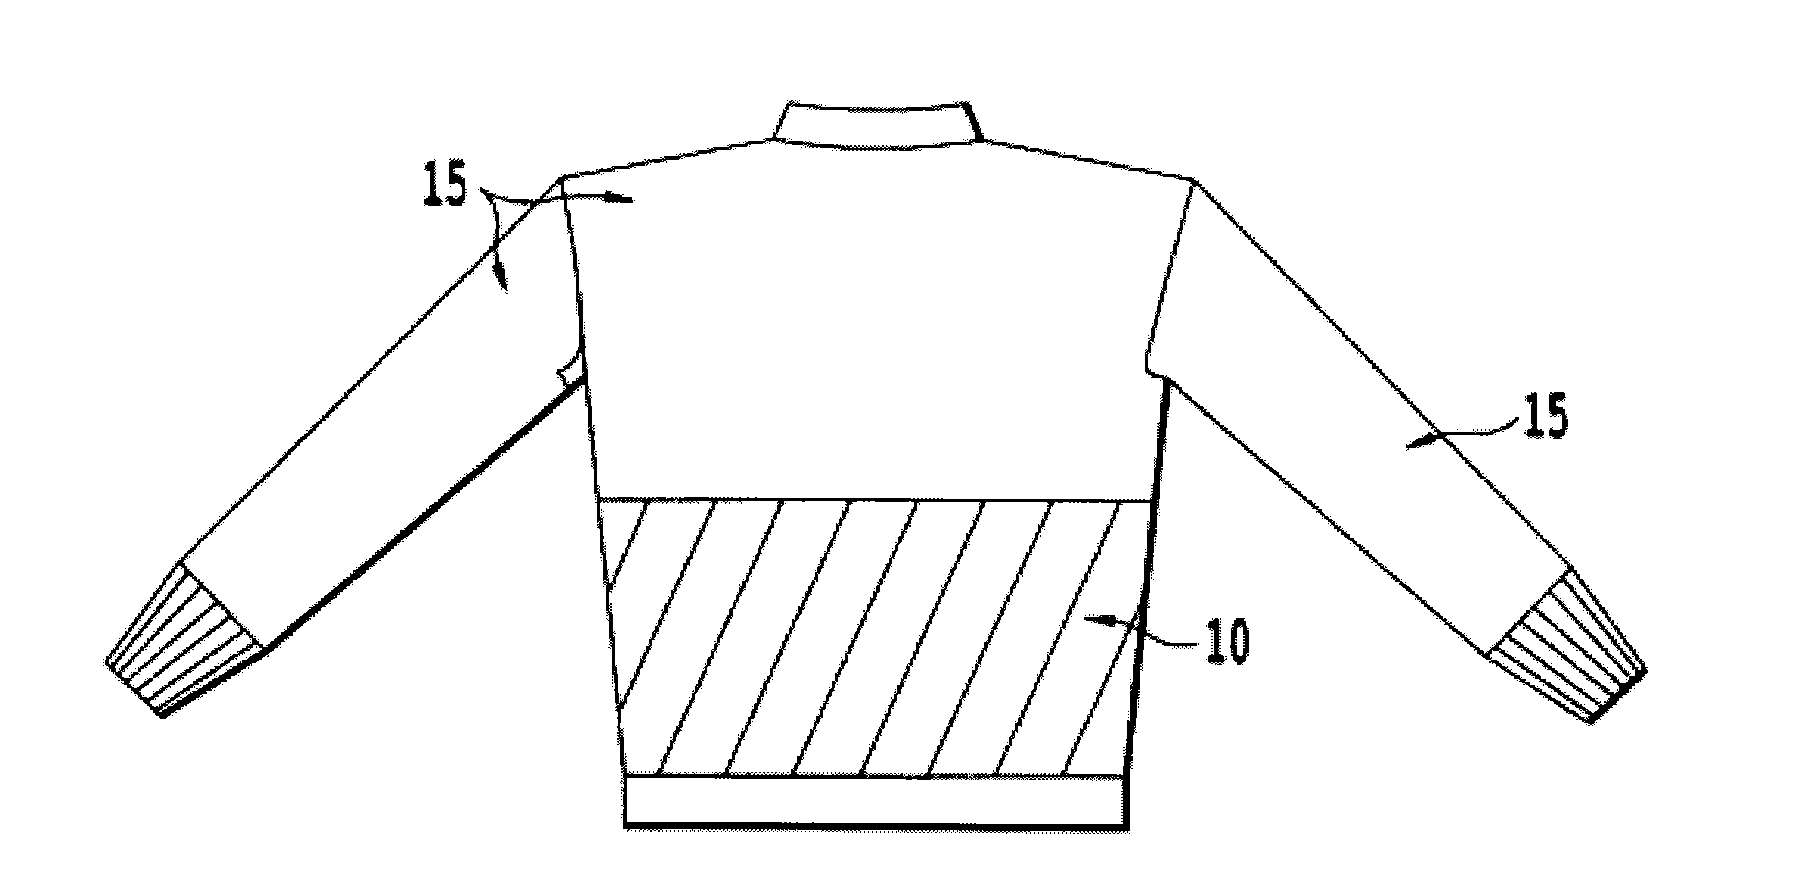 Stab resistant knit fabric having ballistic resistance made with layered modified knit structure and soft body armor construction containing the same